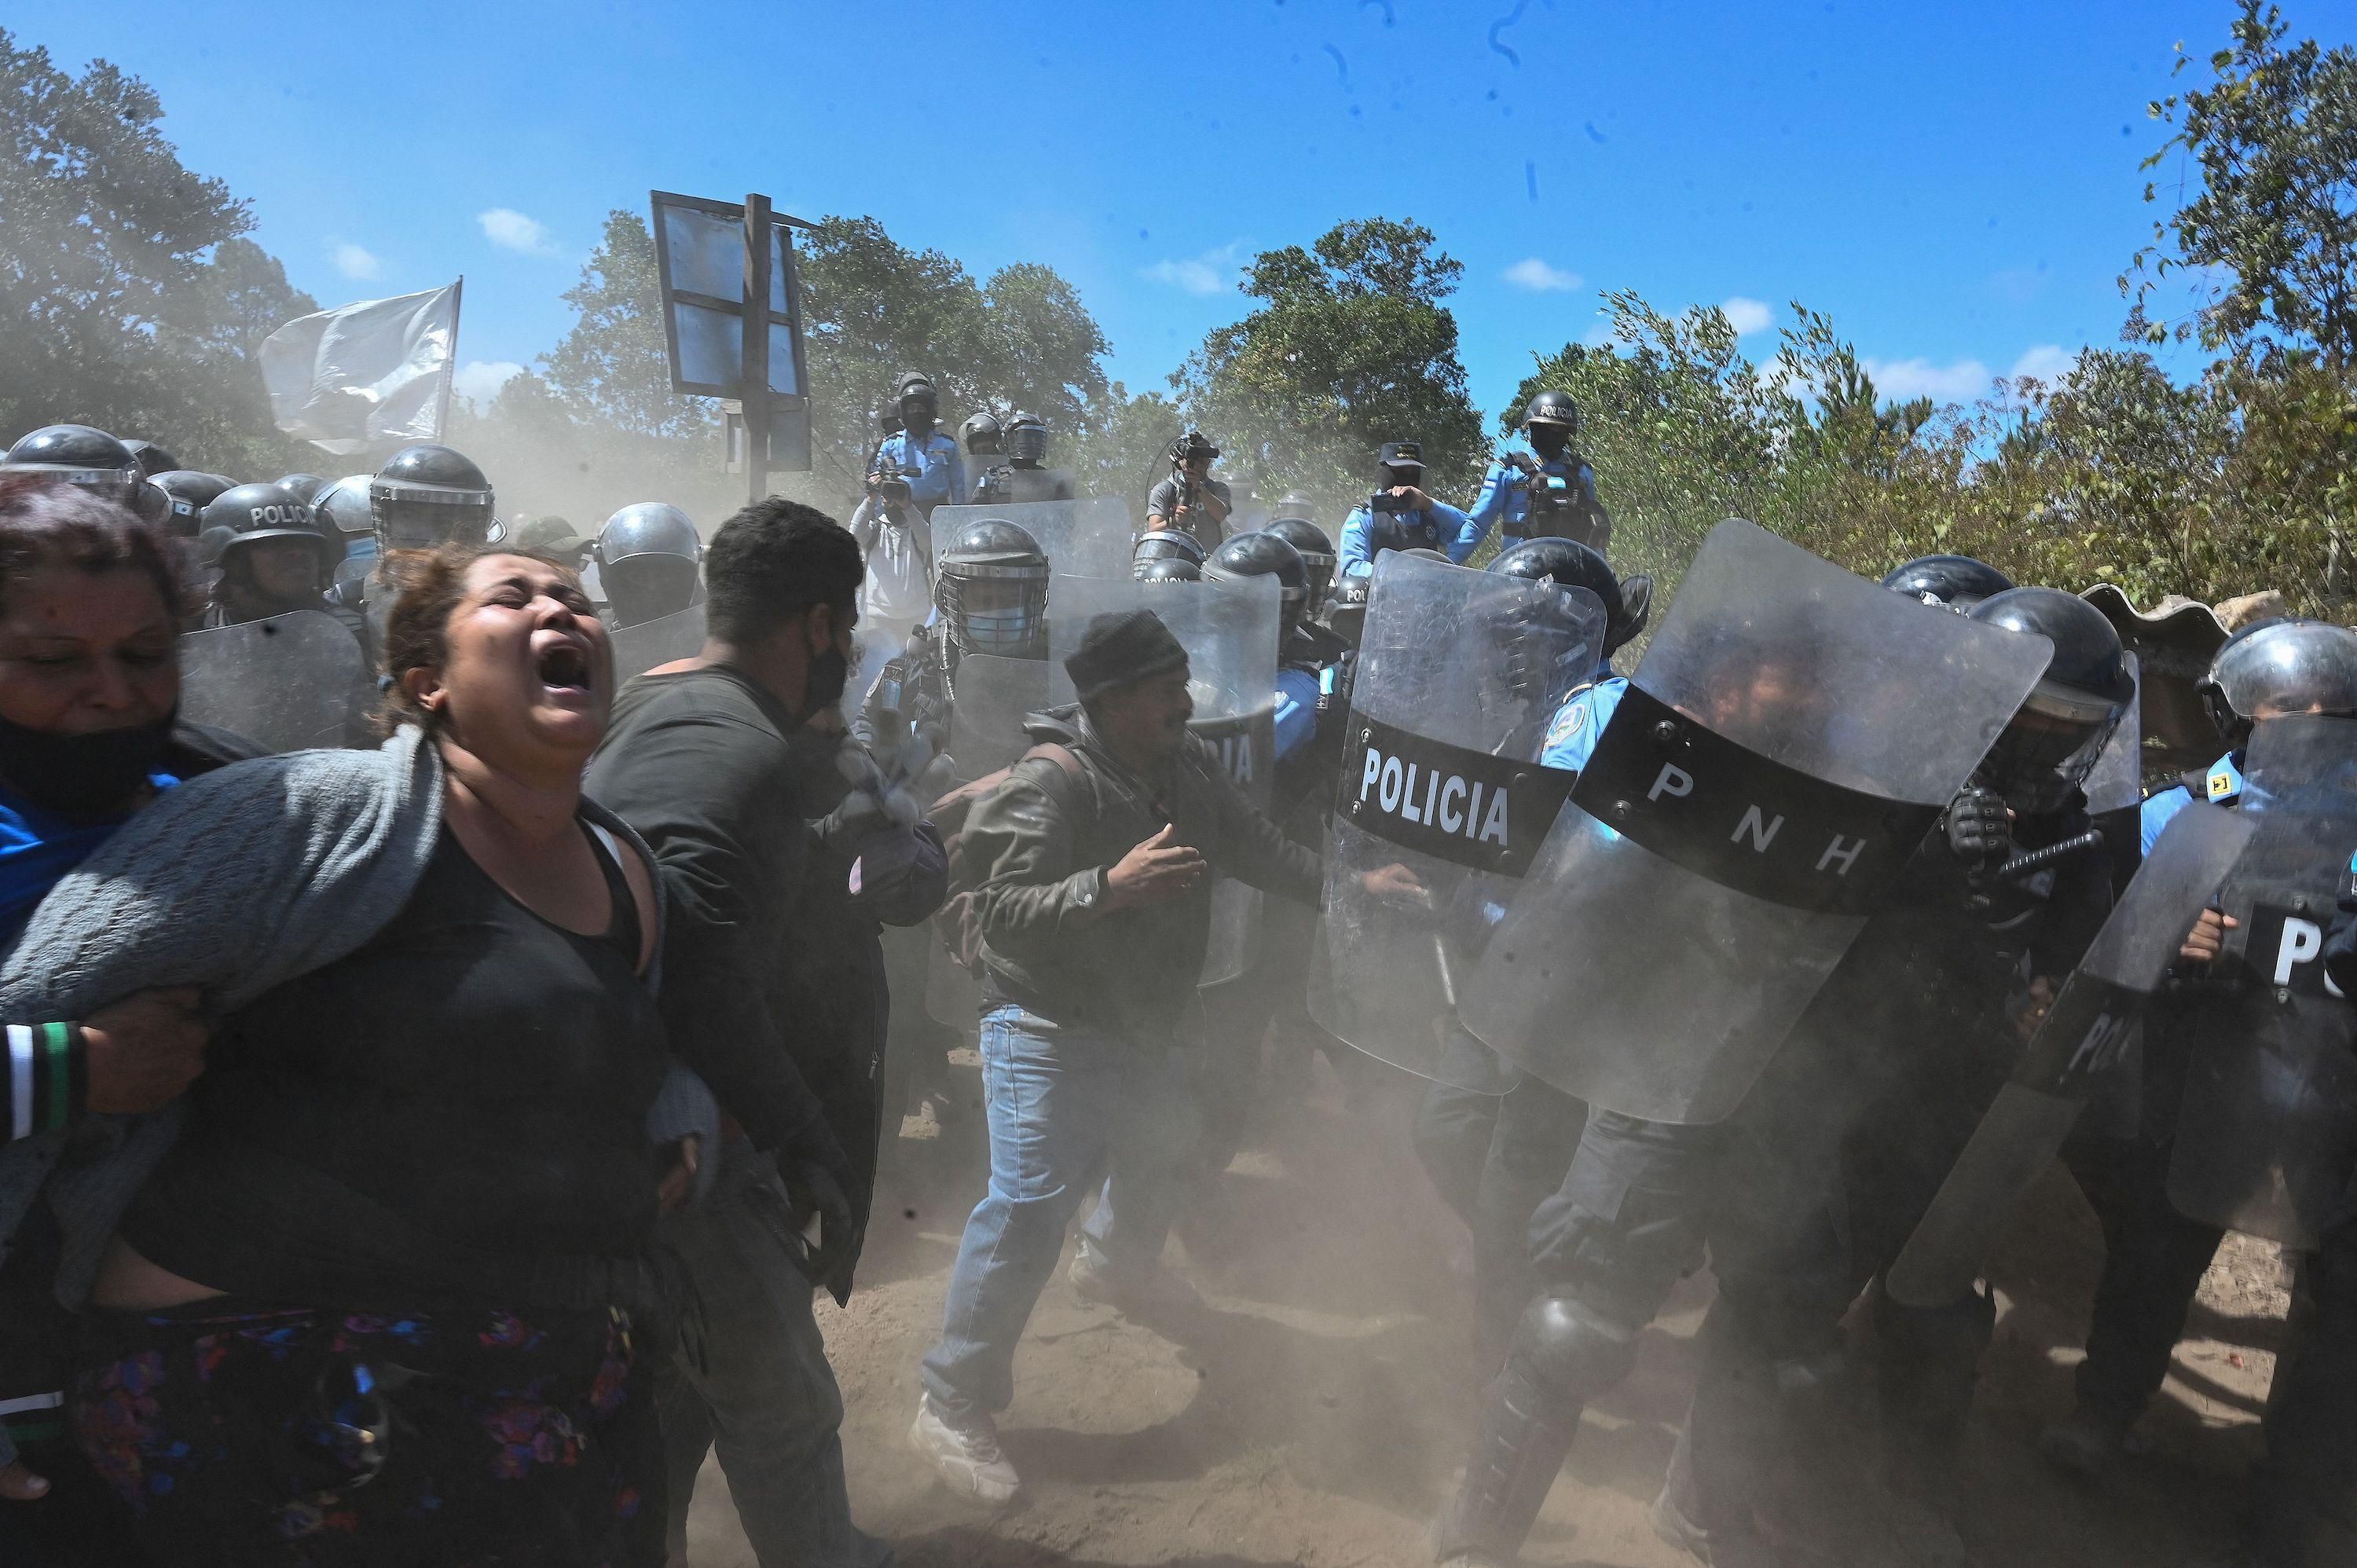 Residents face riot police during an attempted eviction at Tierras del Padre, a Lenca Indigenous community between the municipalities of Ojojona and San Buenaventura, Francisco Morazan department, Honduras, on February 9, 2022. 